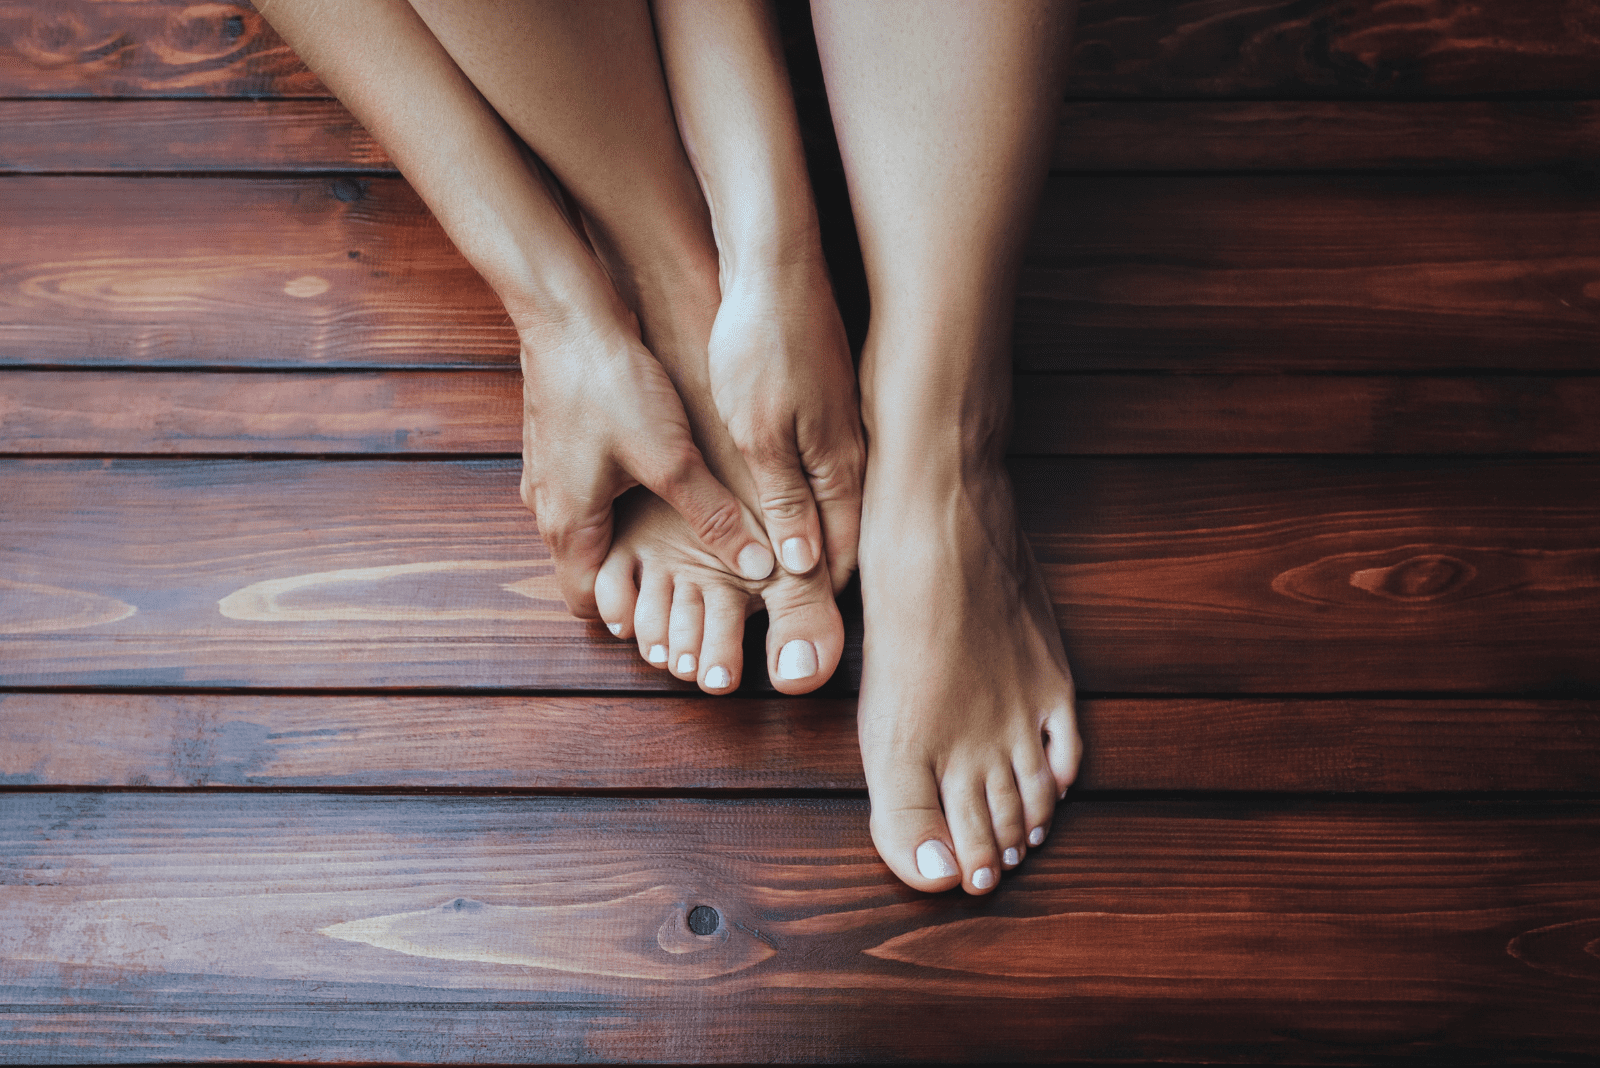 Right Foot Itching Female Superstition: Is It Good Or Bad Luck?